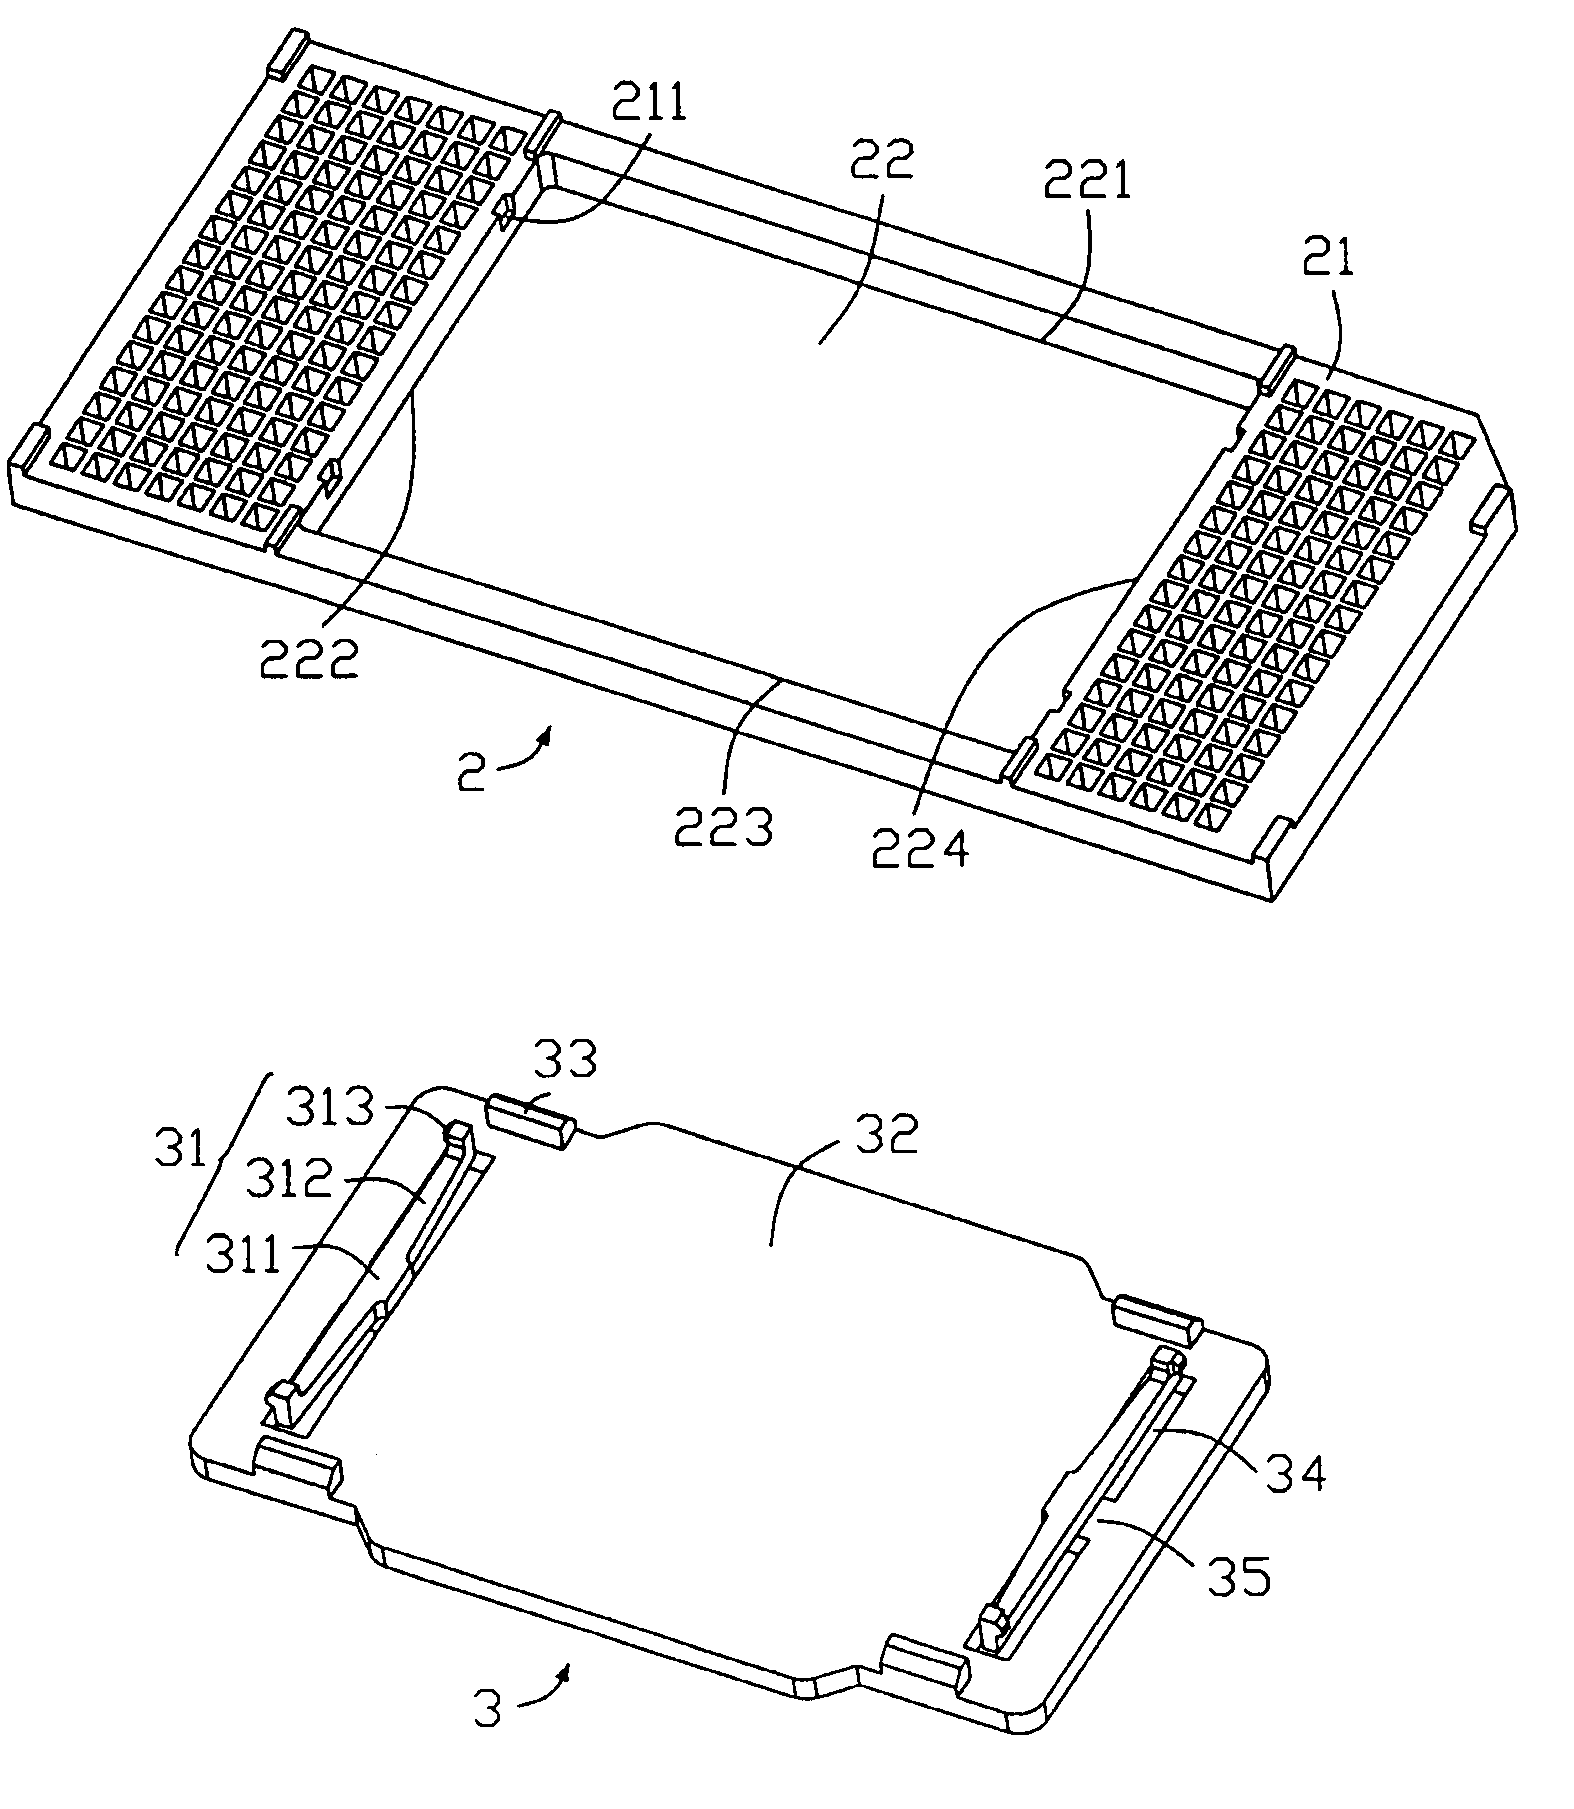 Electrical connector assembly having improved pickup cap